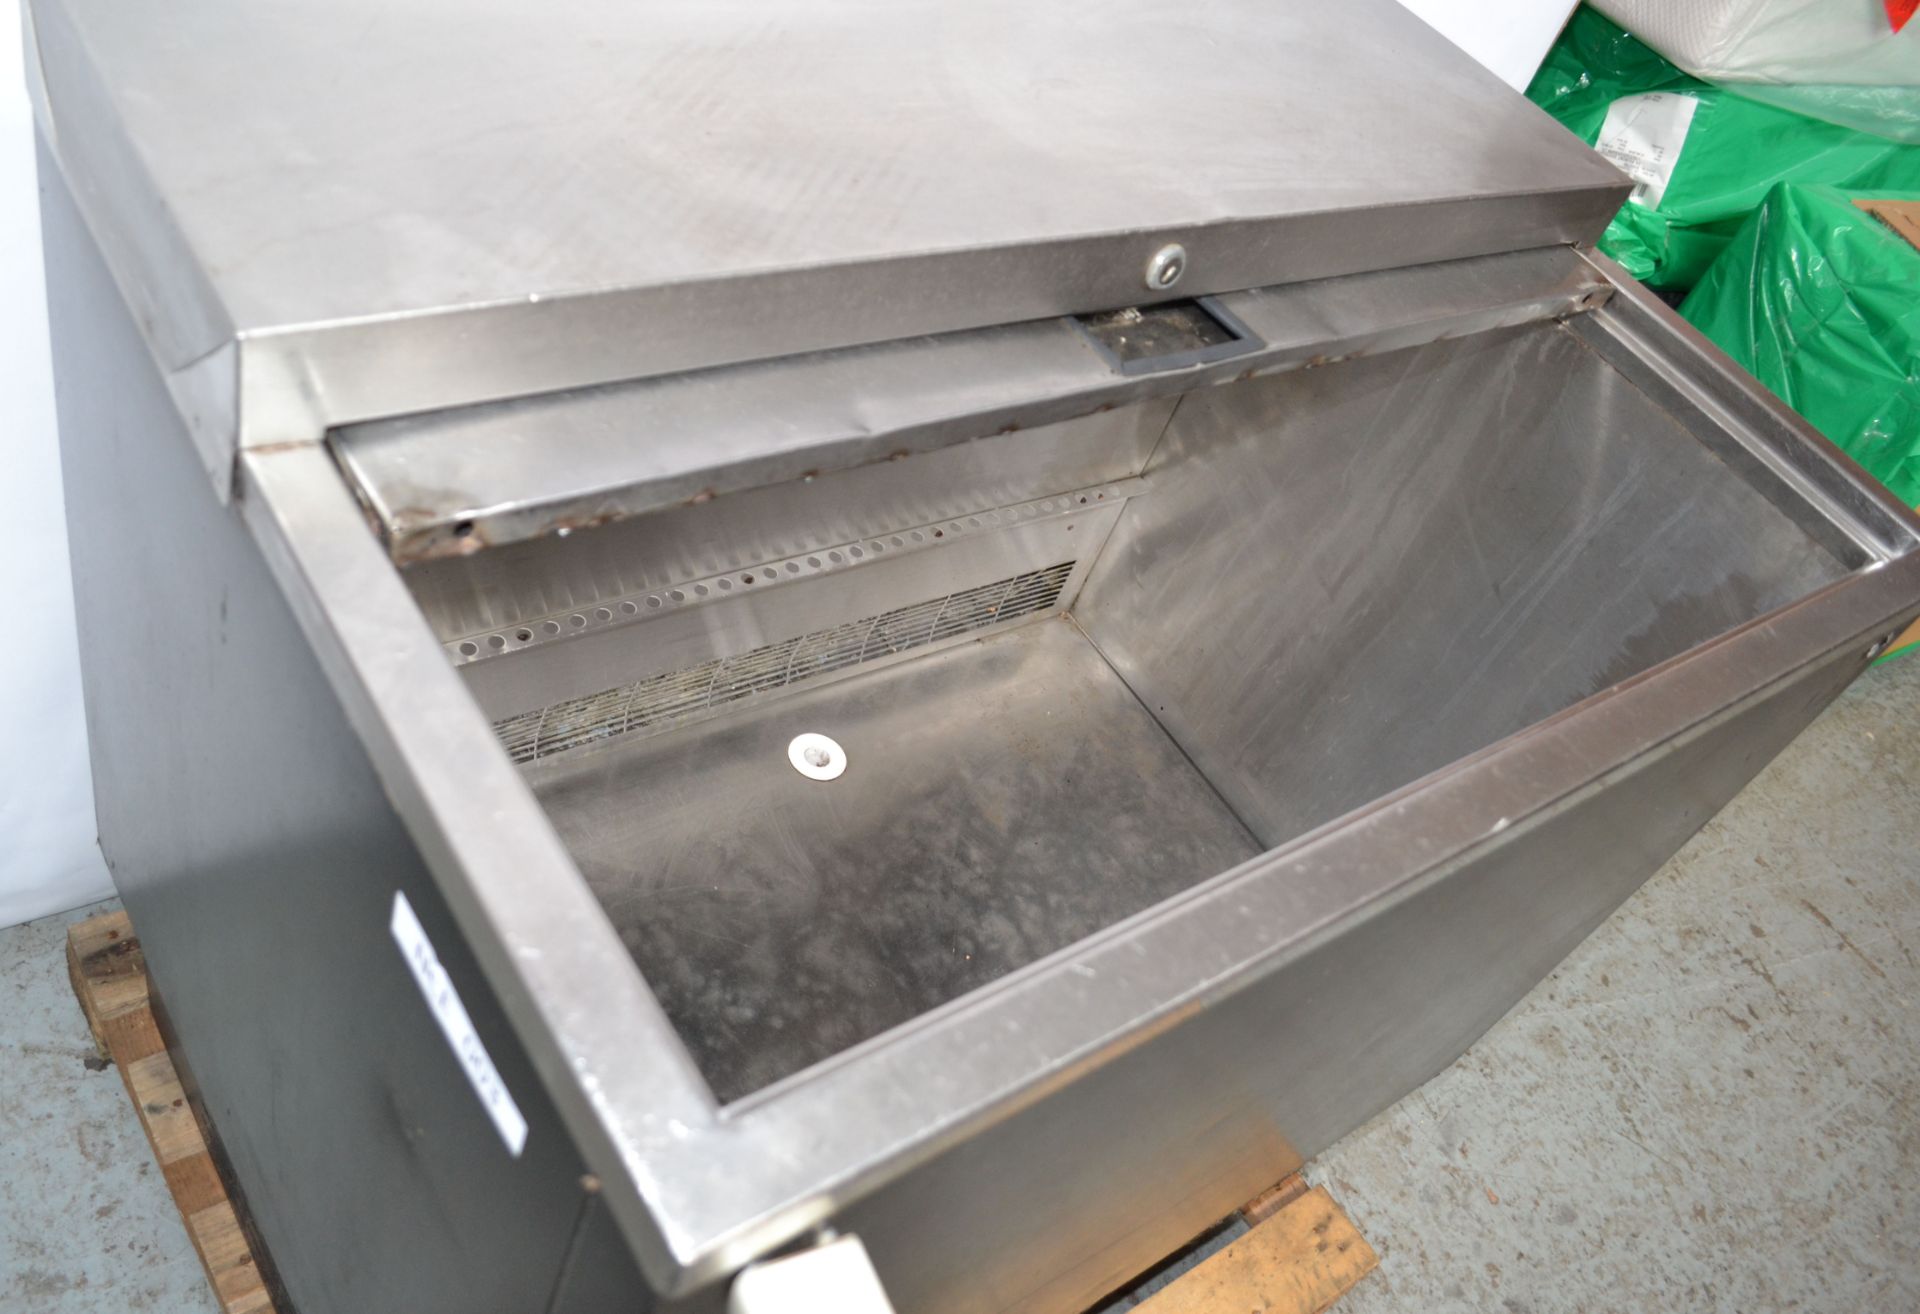 1 x IMC BK90 Series 2 Top Loading Bottle Cooler - Ref :NCE003 - CL007 - Location: Altrincham - Image 10 of 17